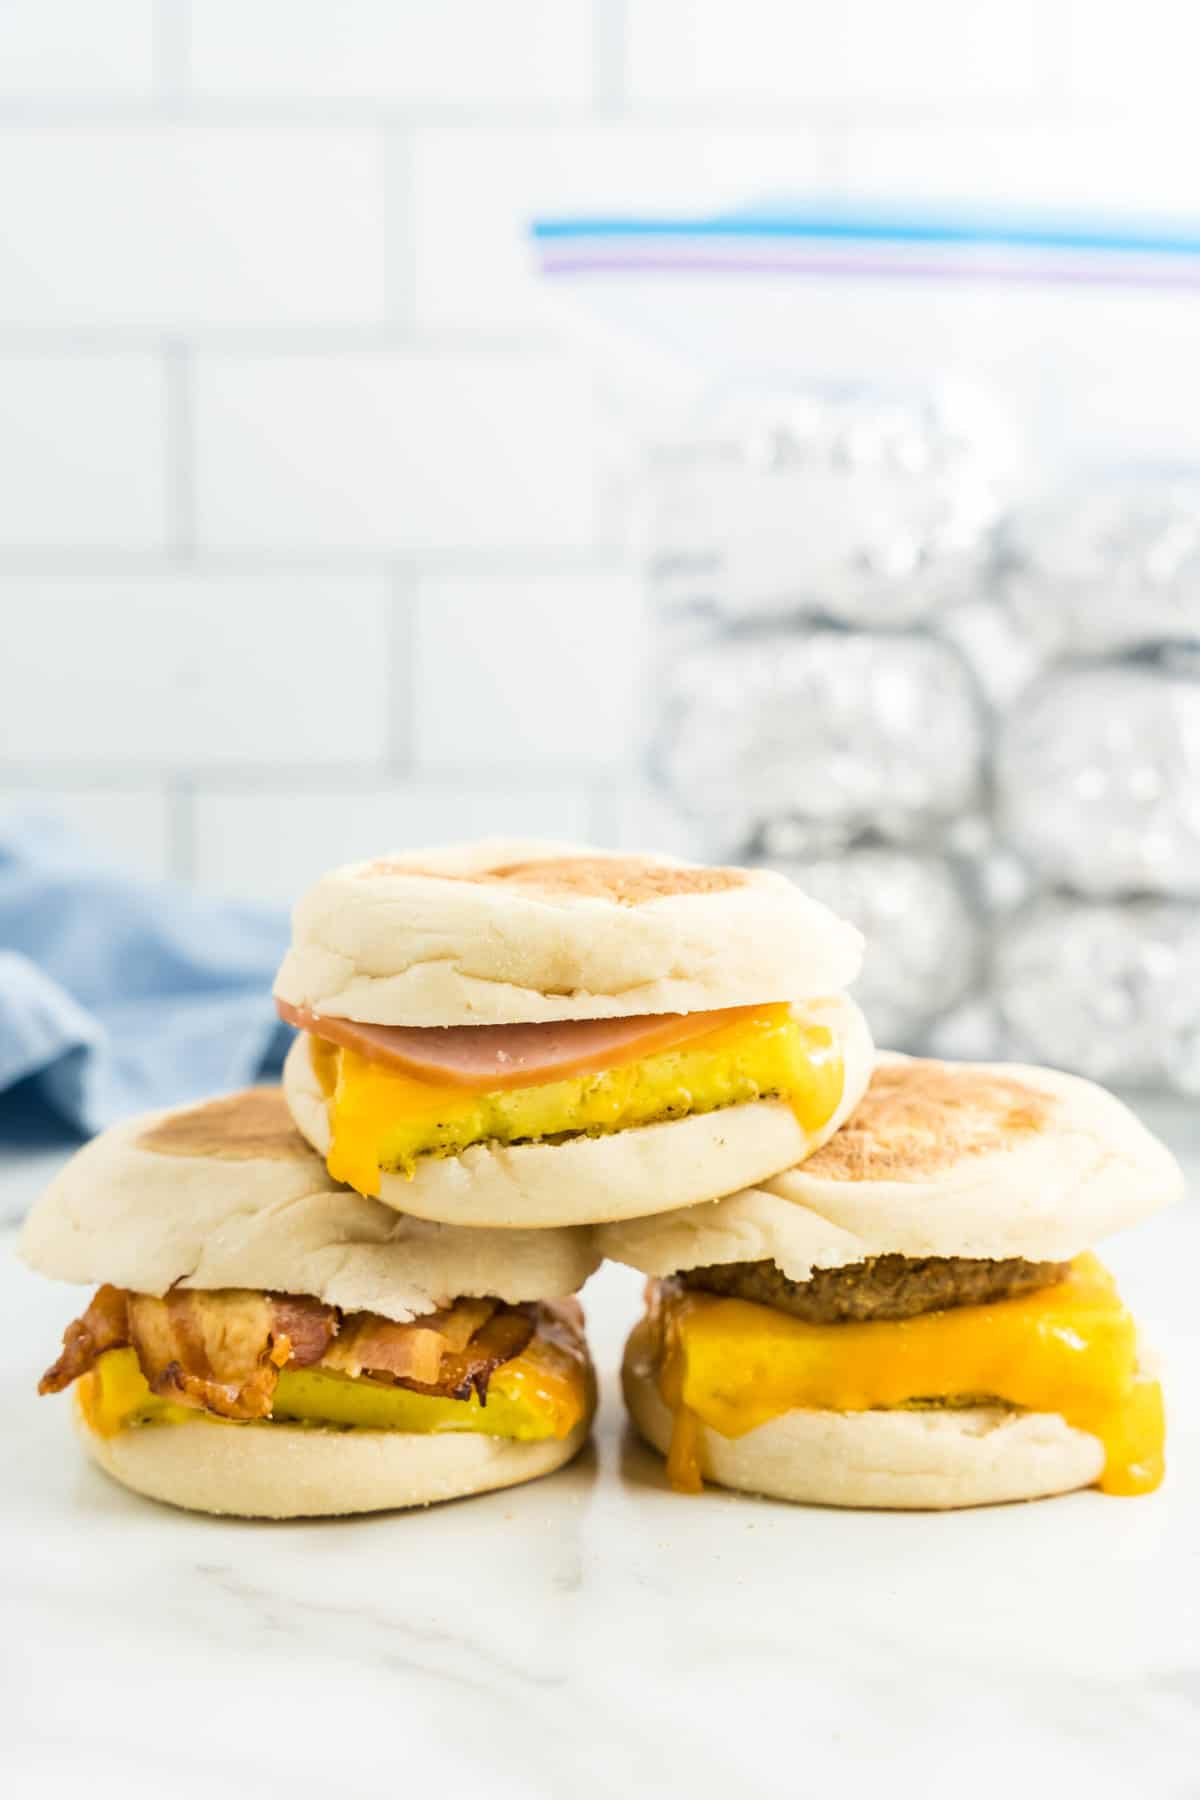 Freezer Breakfast Sandwiches with a Variety of Meats Stacked with Freezer Sandwiches in Tinfoil